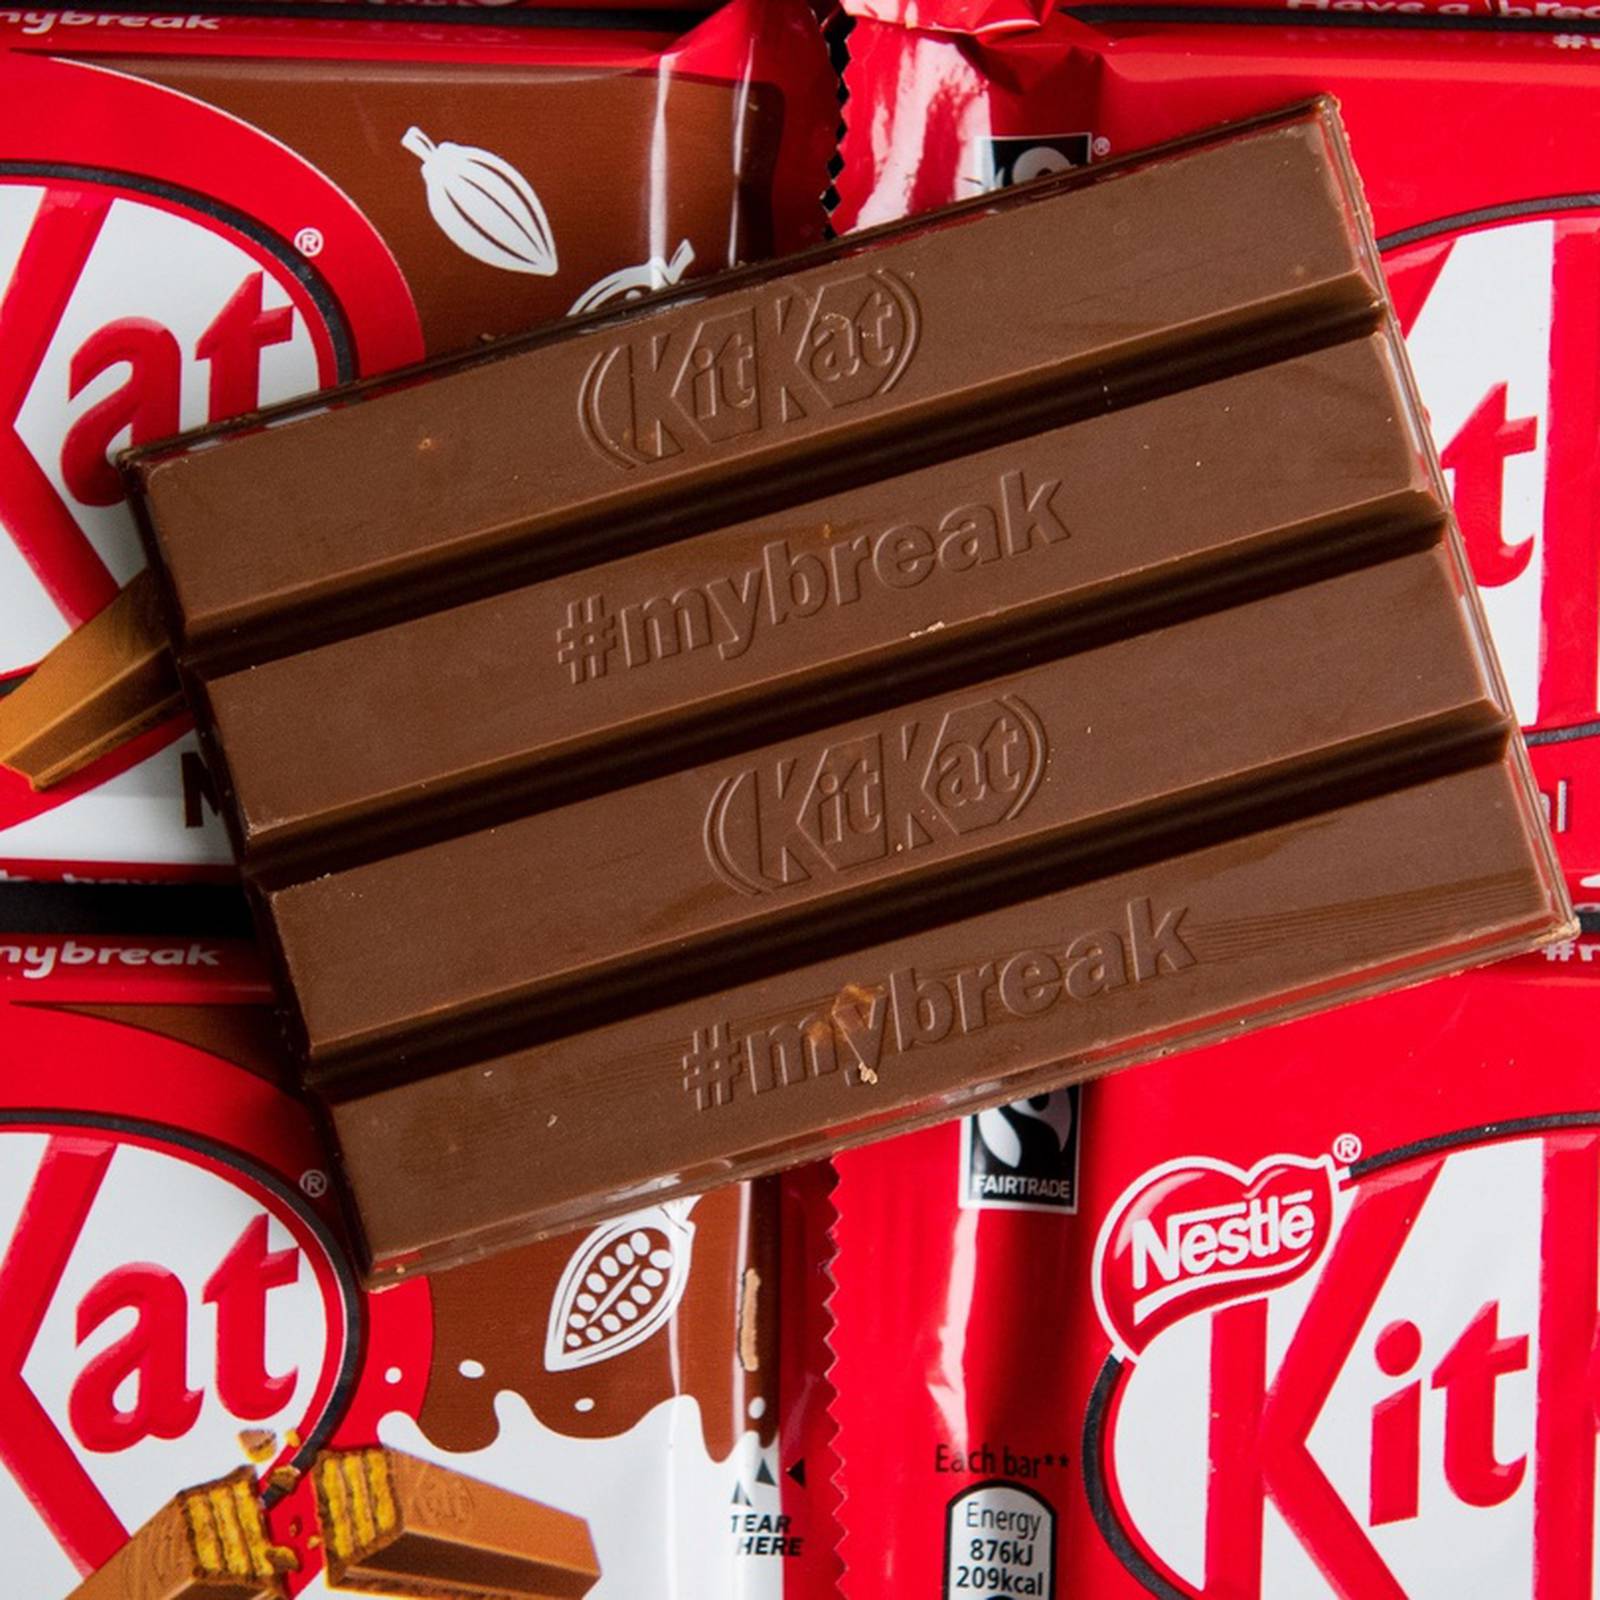 KitKat fails to protect its four-fingered form in appeal court – The Irish  Times